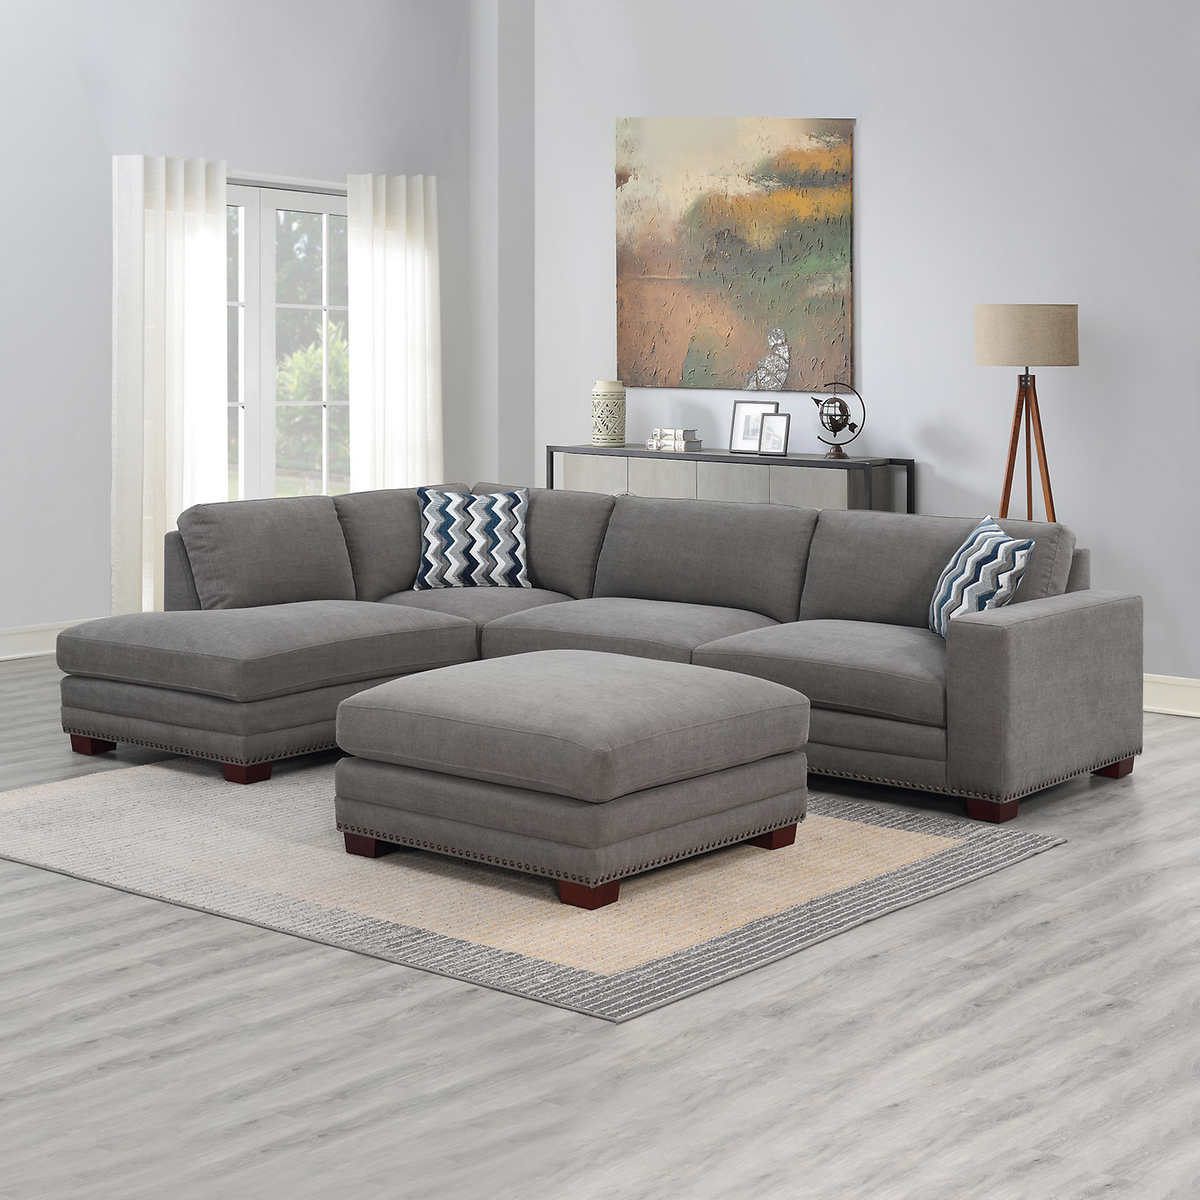 Penelope Fabric Sectional with Ottoman - $1399 @ Costco